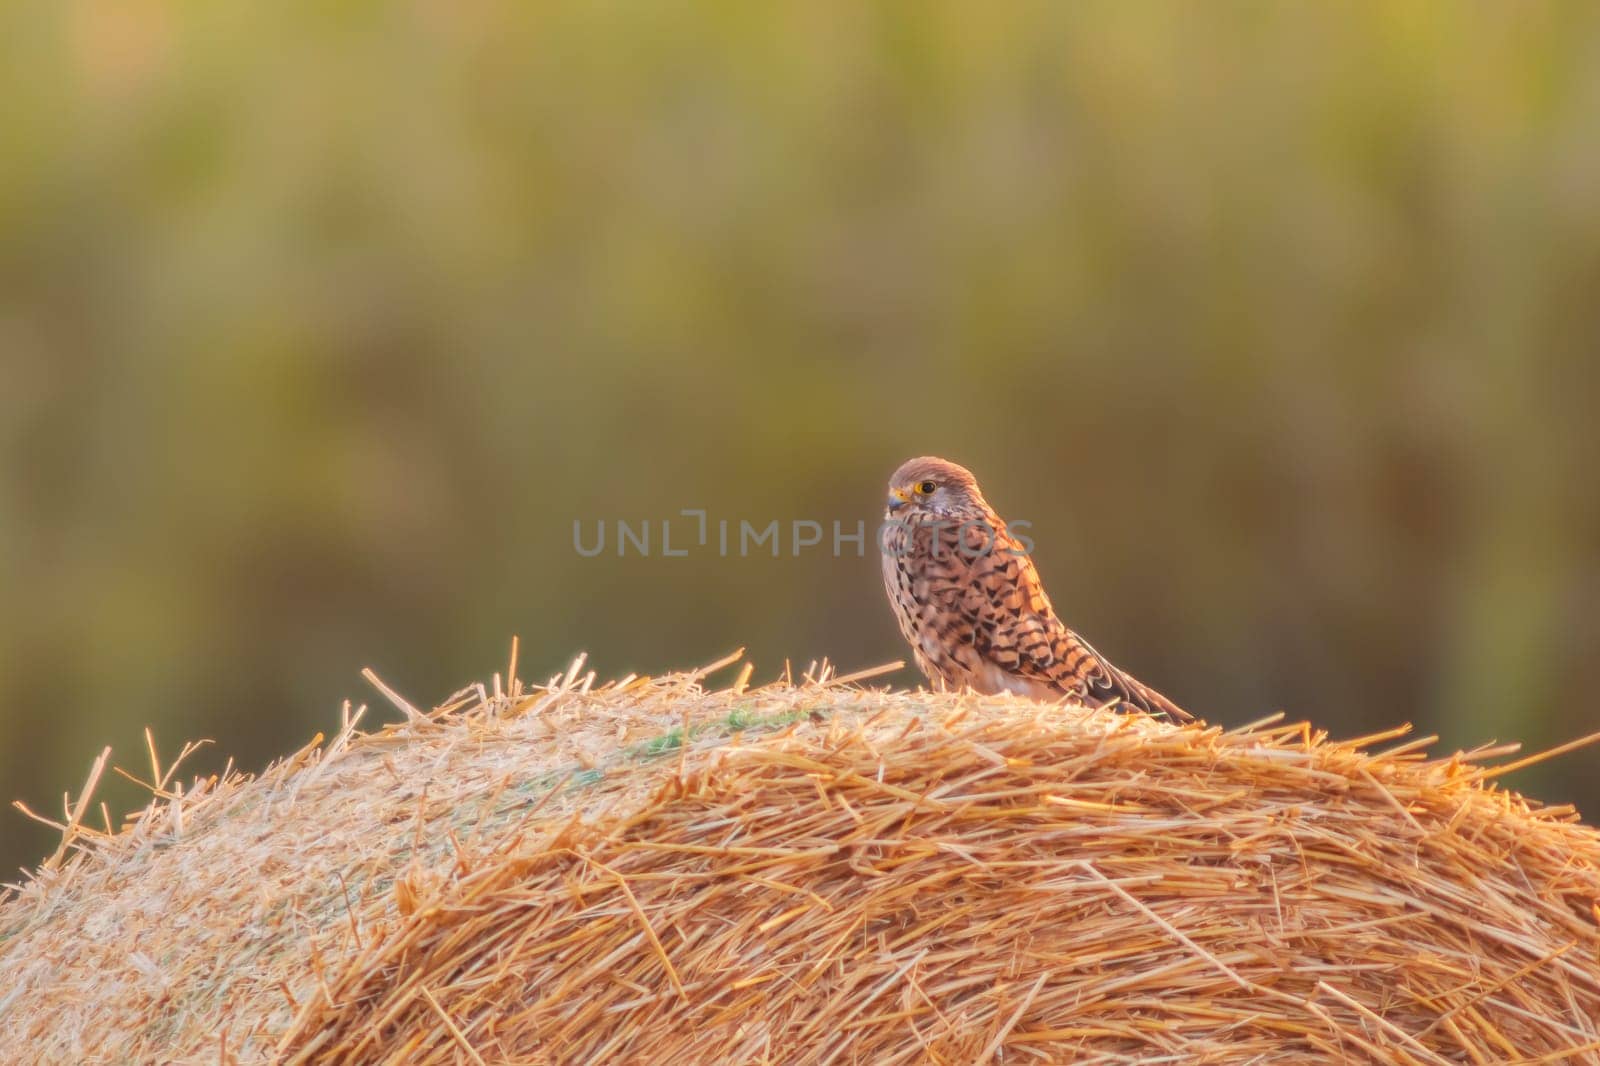 a Female kestrel (Falco tinnunculus) perched on a bale of straw scanning the field for prey